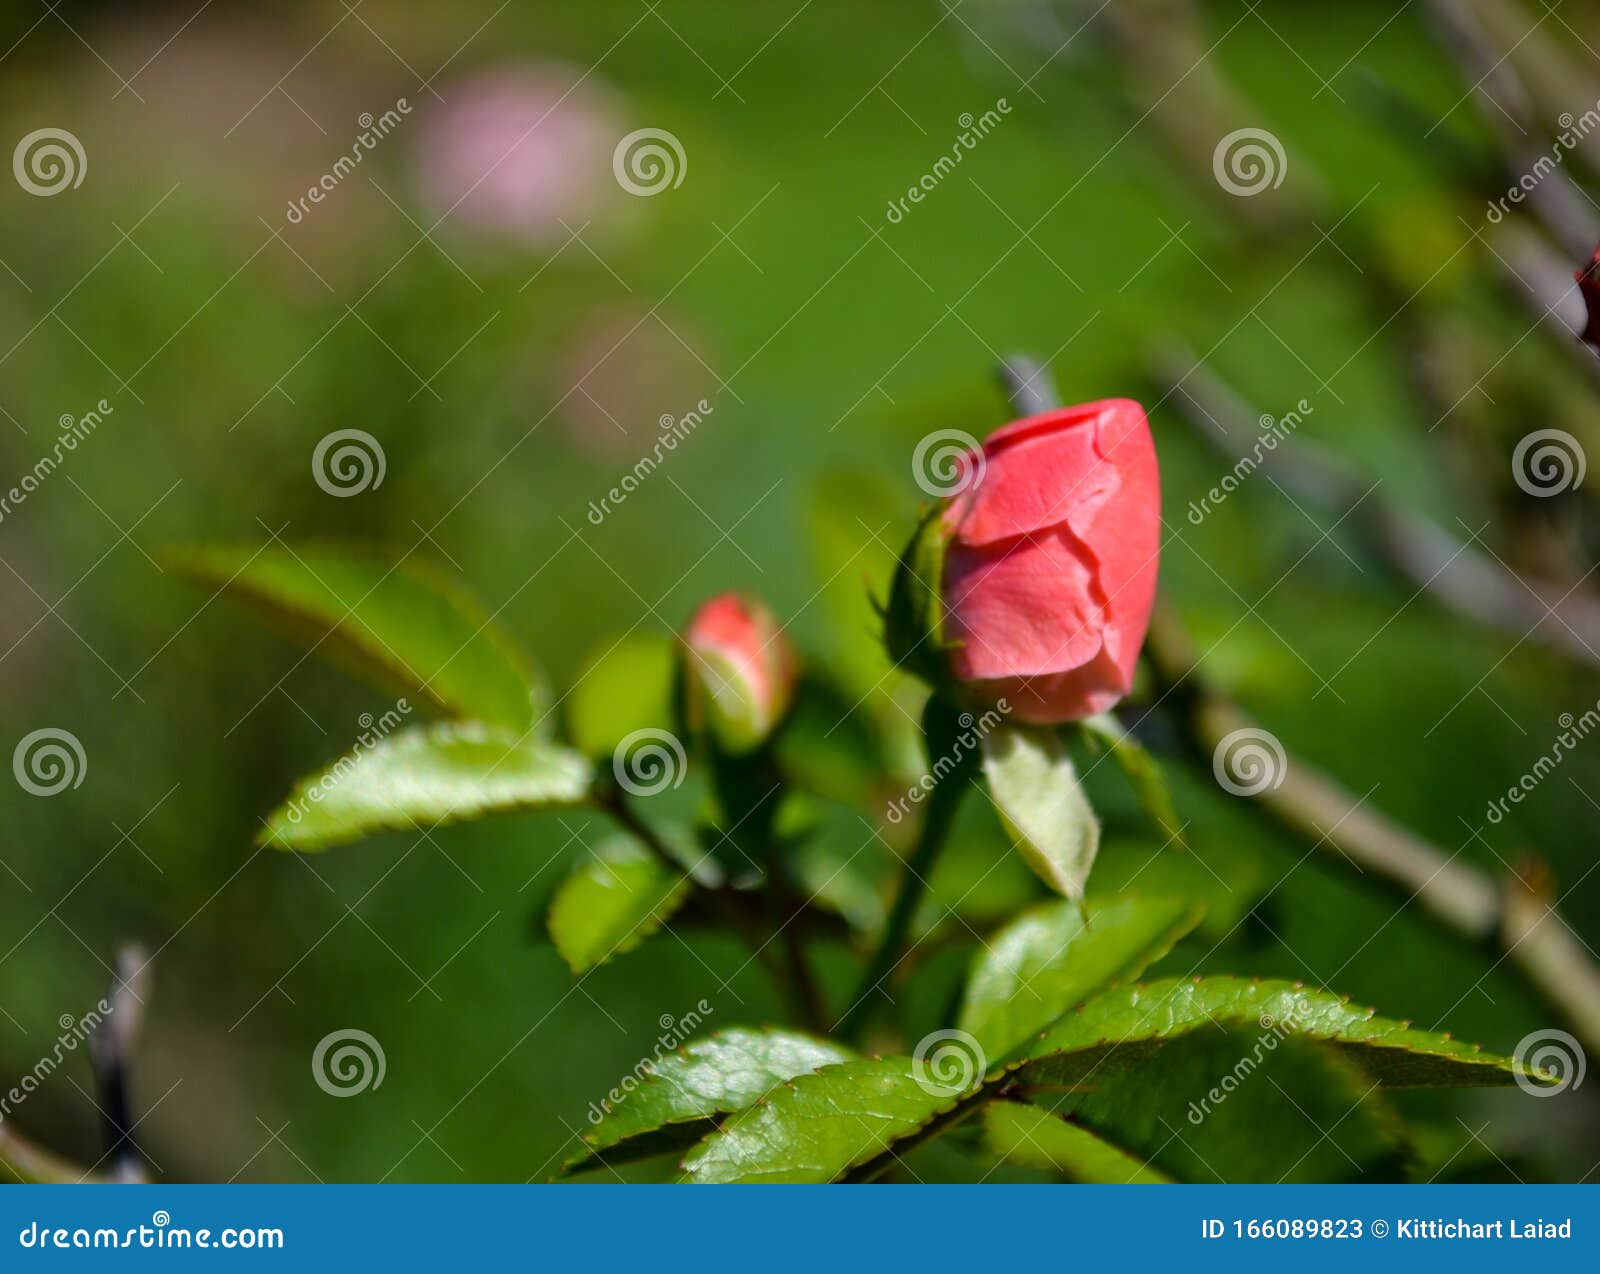 Close Up Of Budding Red Rose In Nature Stock Image Image Of Bright